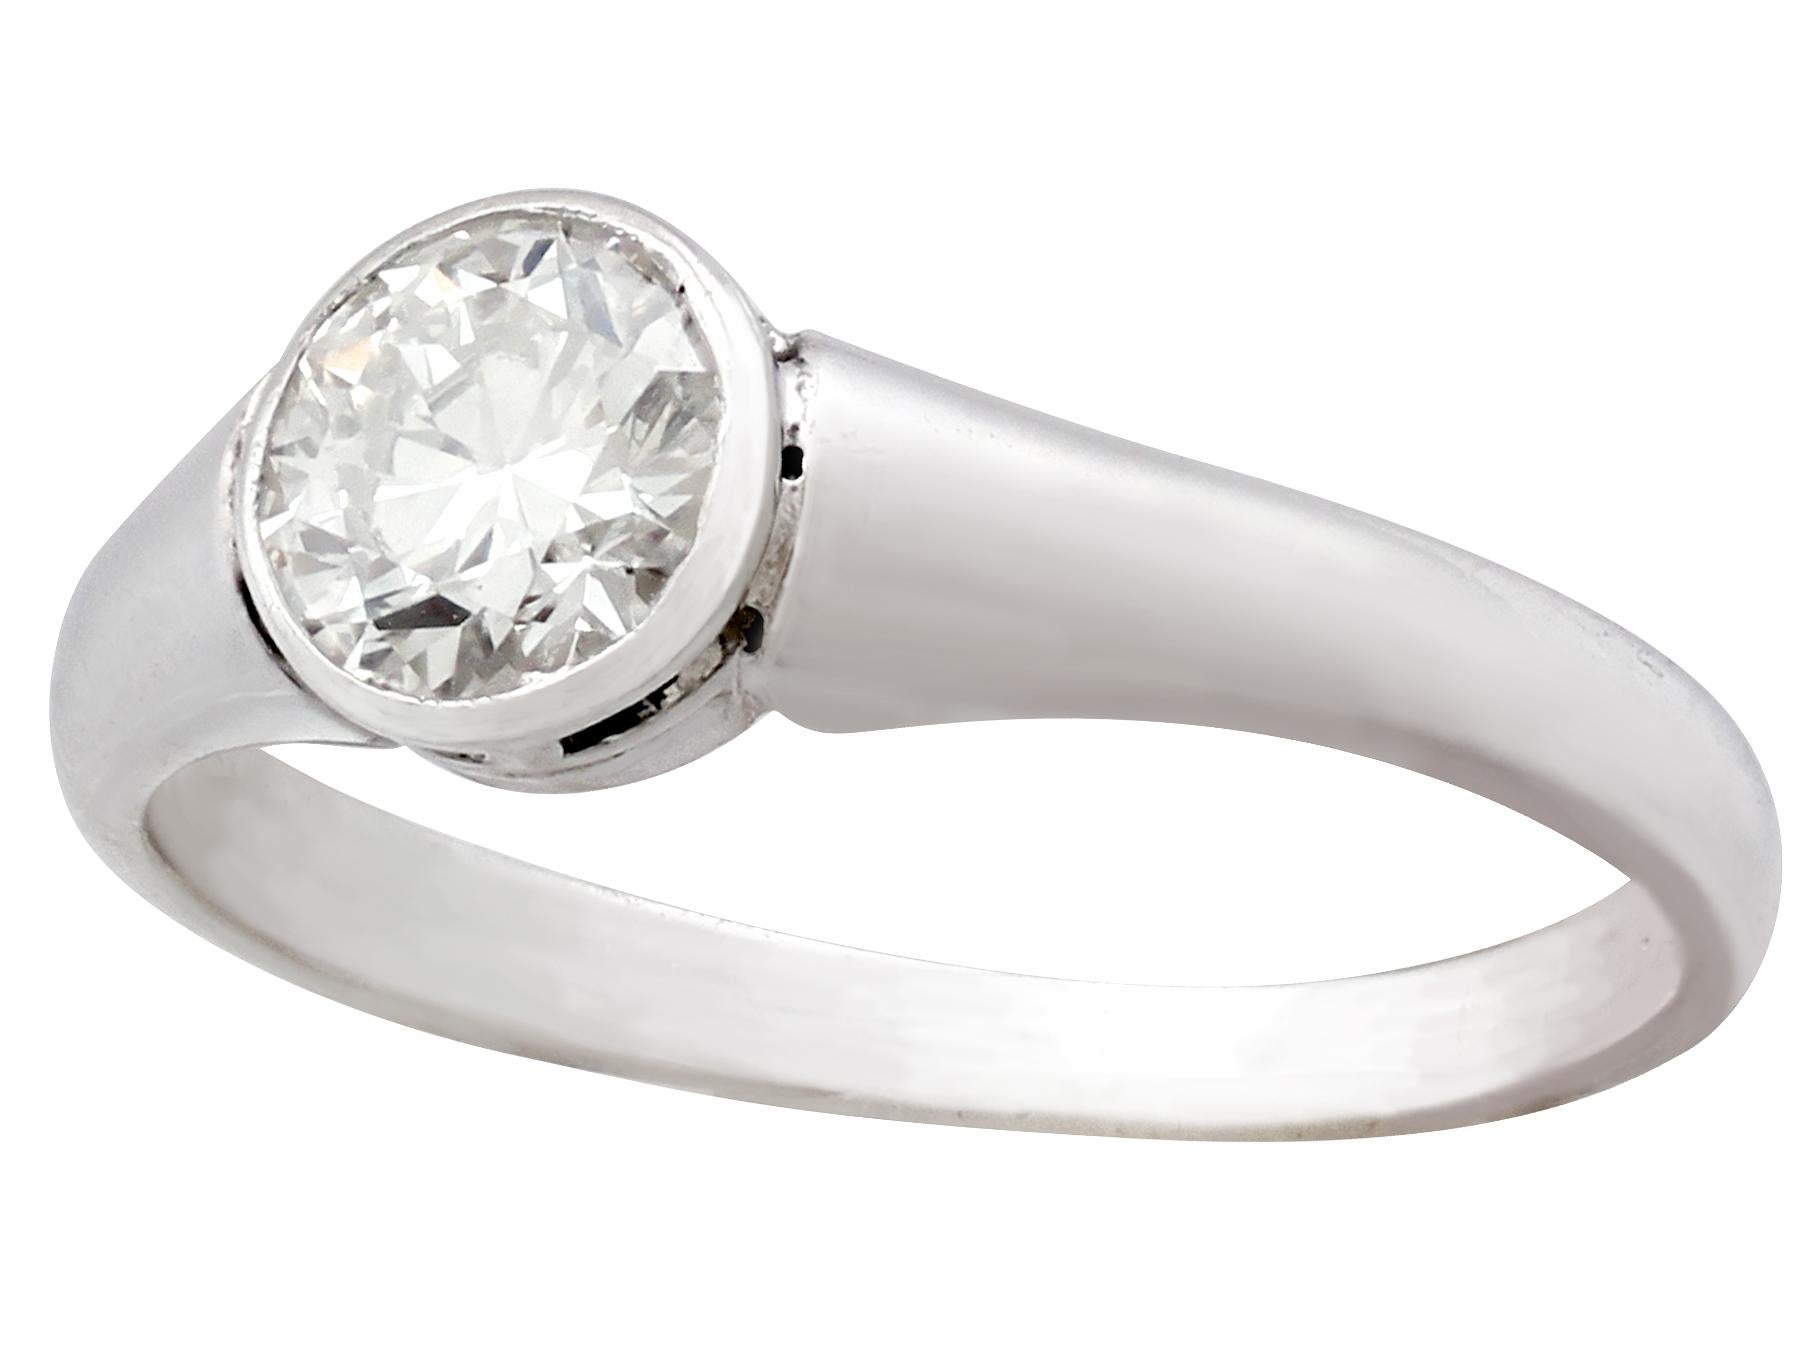 Women's Antique Diamond and White Gold Solitaire Ring, circa 1930